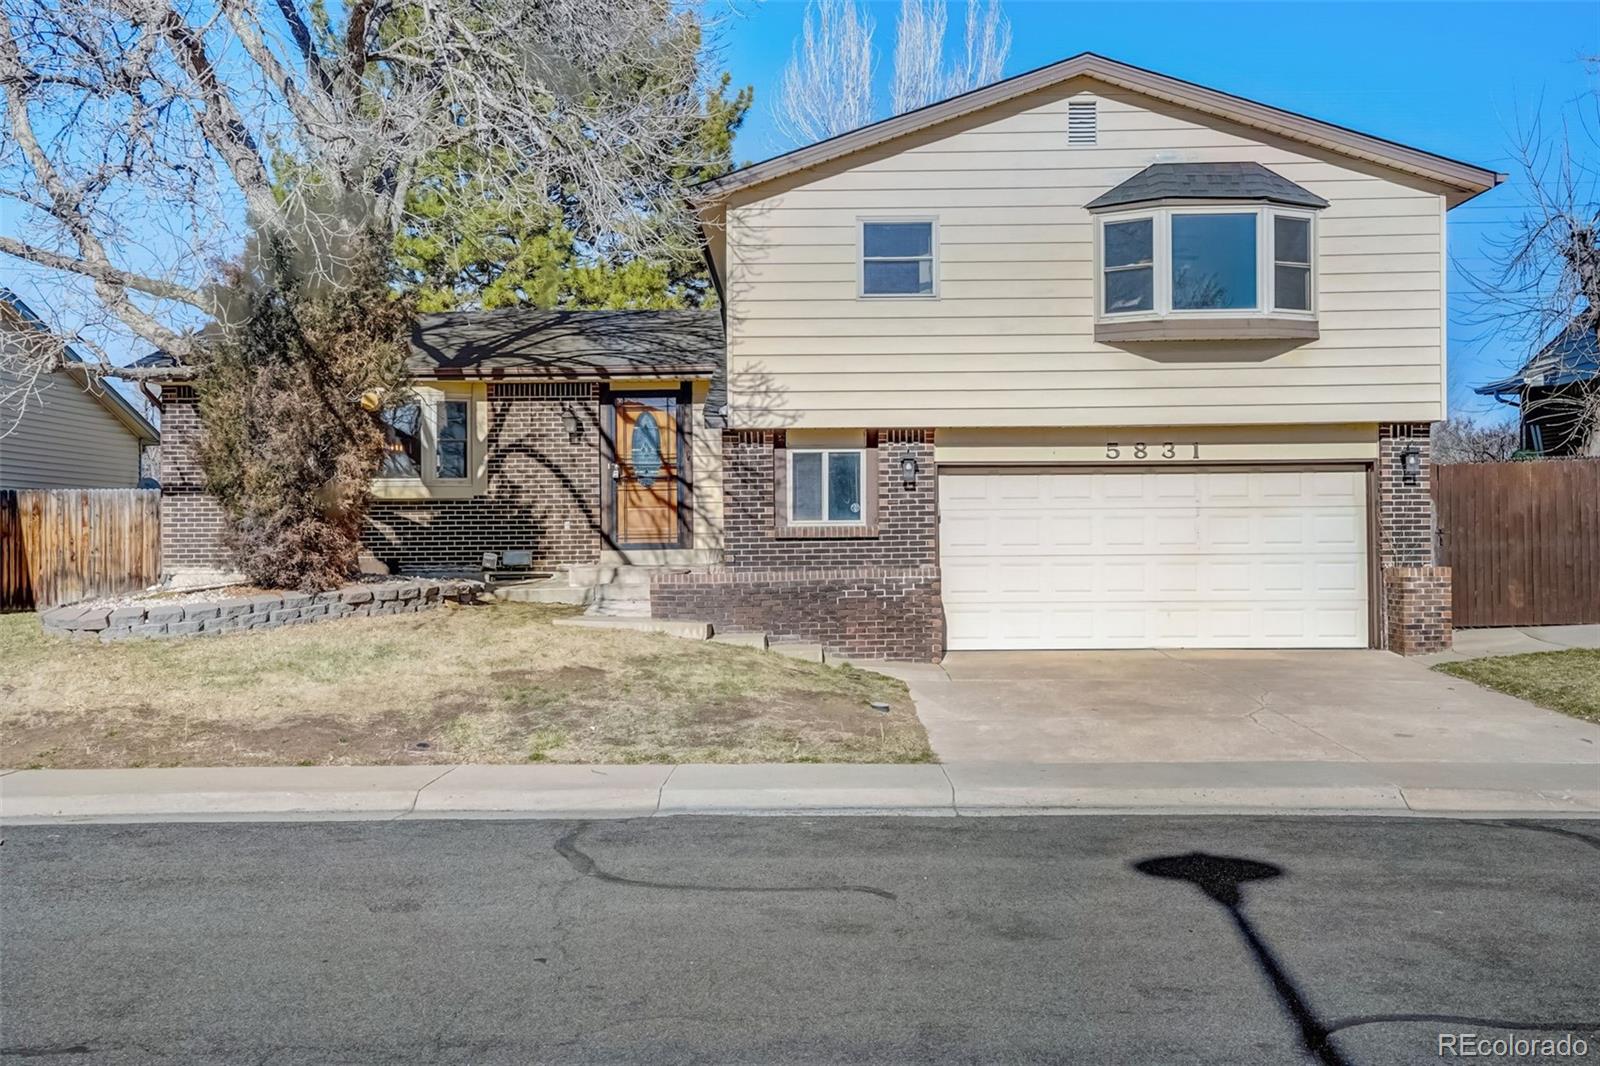 Report Image for 5831 W 108th Place,Westminster, Colorado